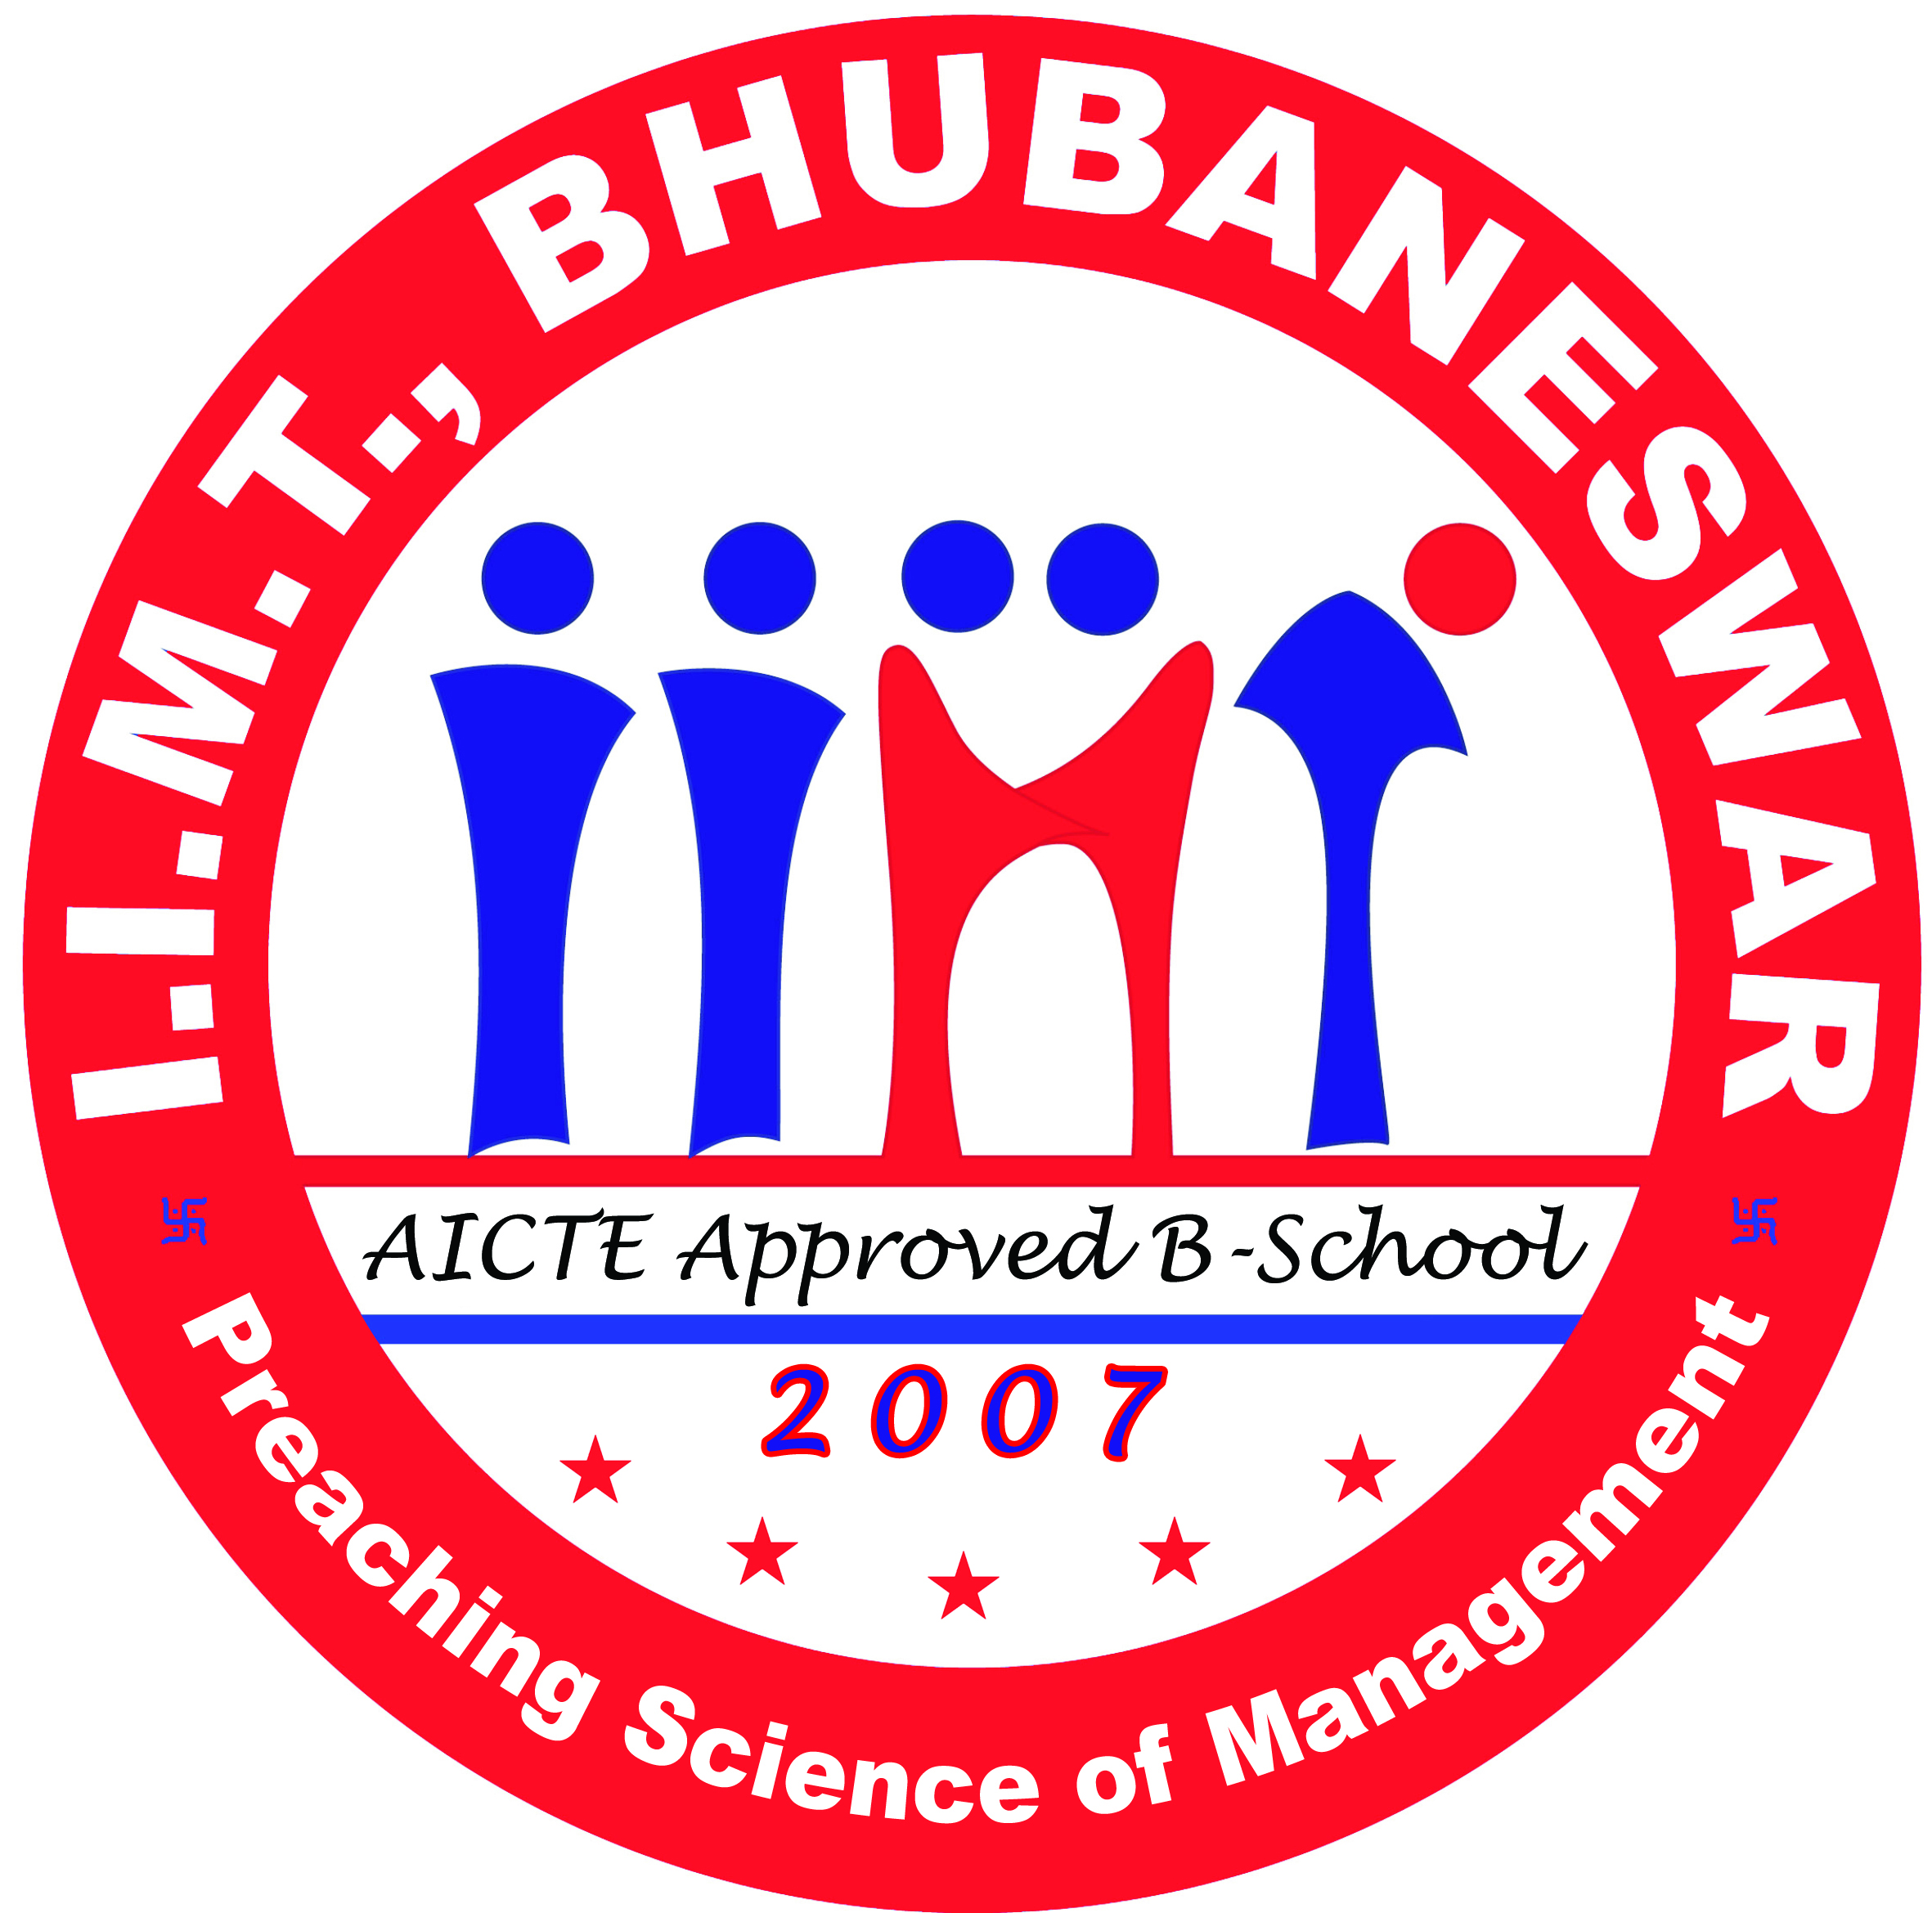 Interscience Institute of Management and Technology, Bhubaneswar